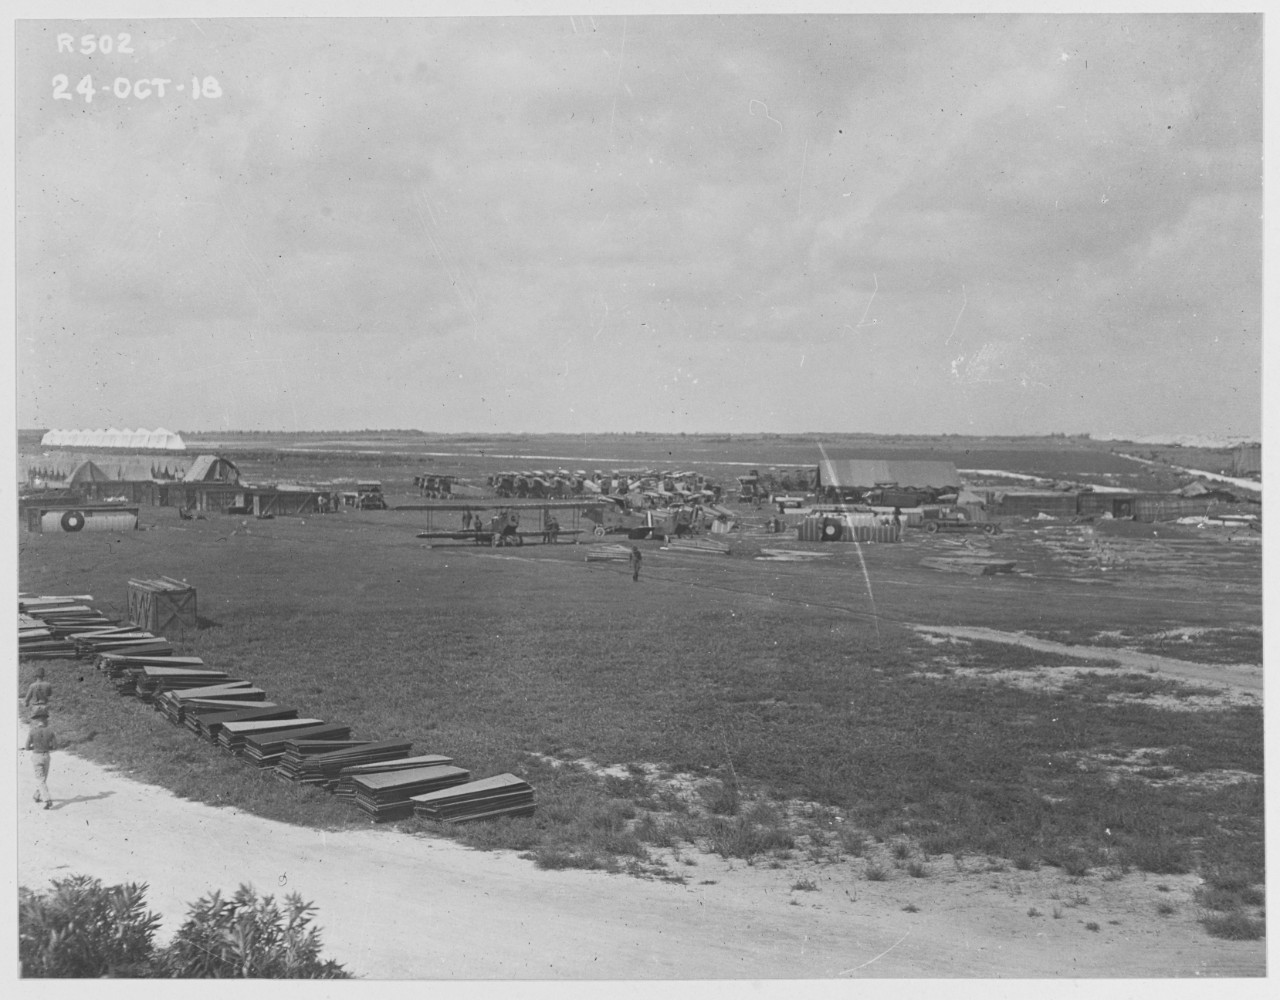 Uncrating planes at camp, U.S. Marine Flying Field, Miami, Florida.